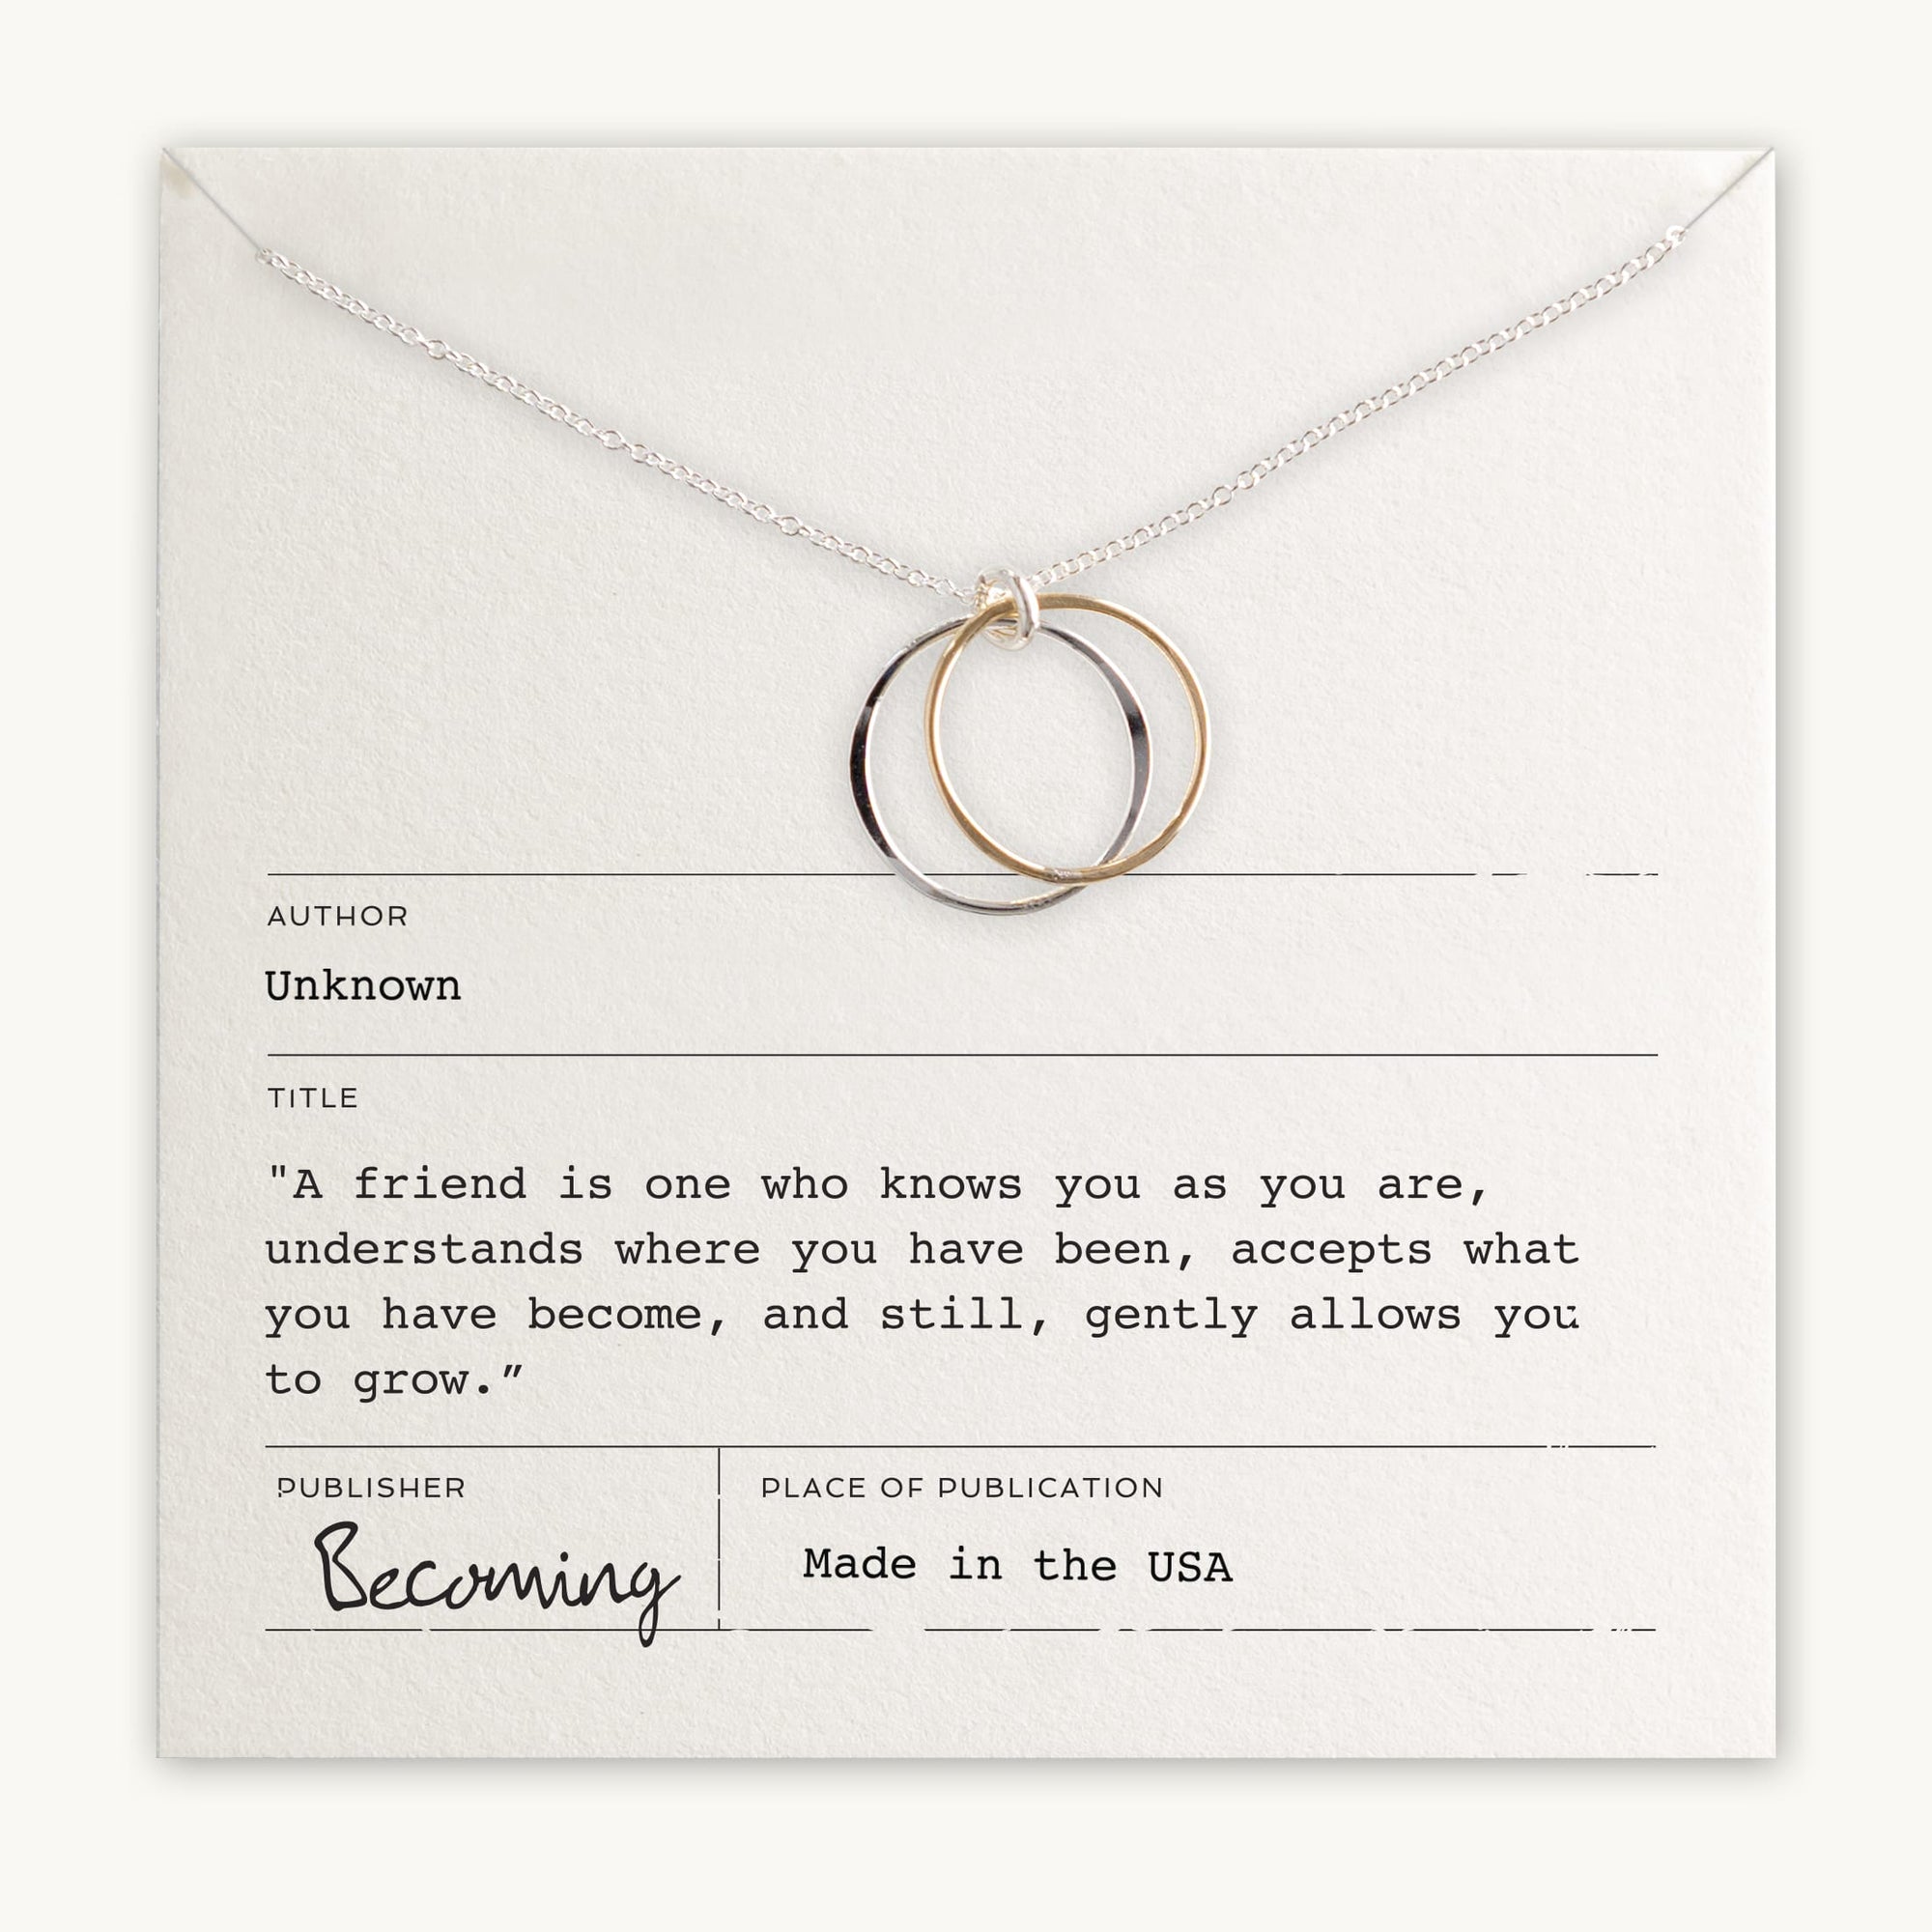 Becoming Jewelry's Friendship Circles Necklace with intertwined circles on a message card with an inspirational quote about friendship.